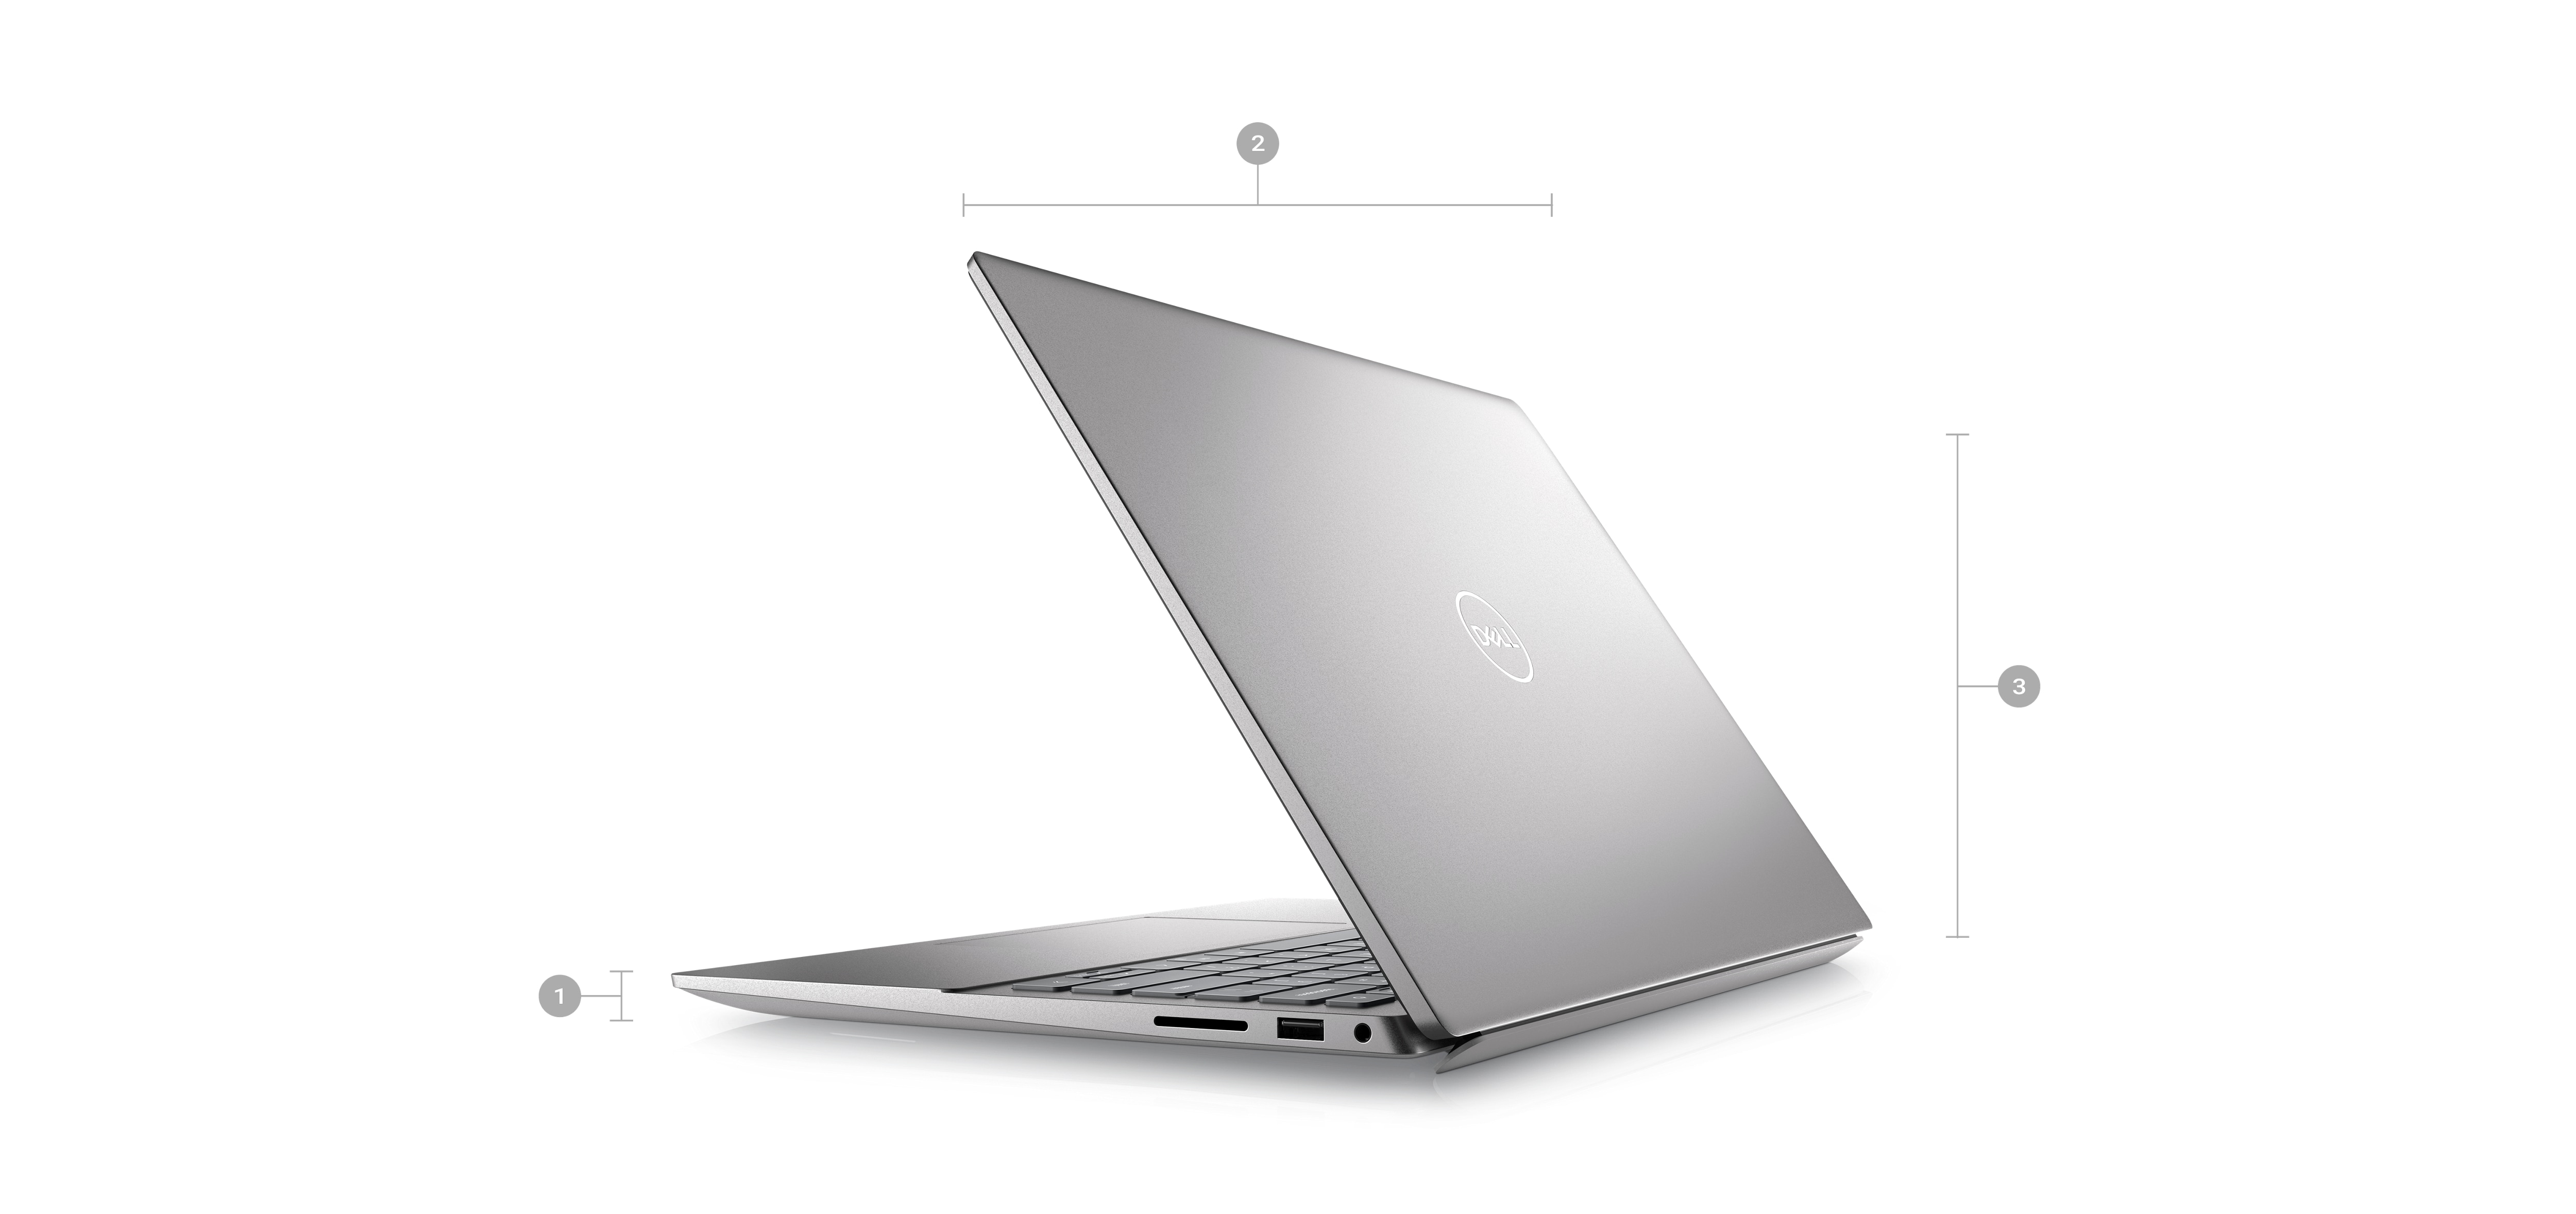 Picture of a Dell Inspiron 5425 laptop with its back visible and numbers from 1 to 3 signaling product dimensions & weight.